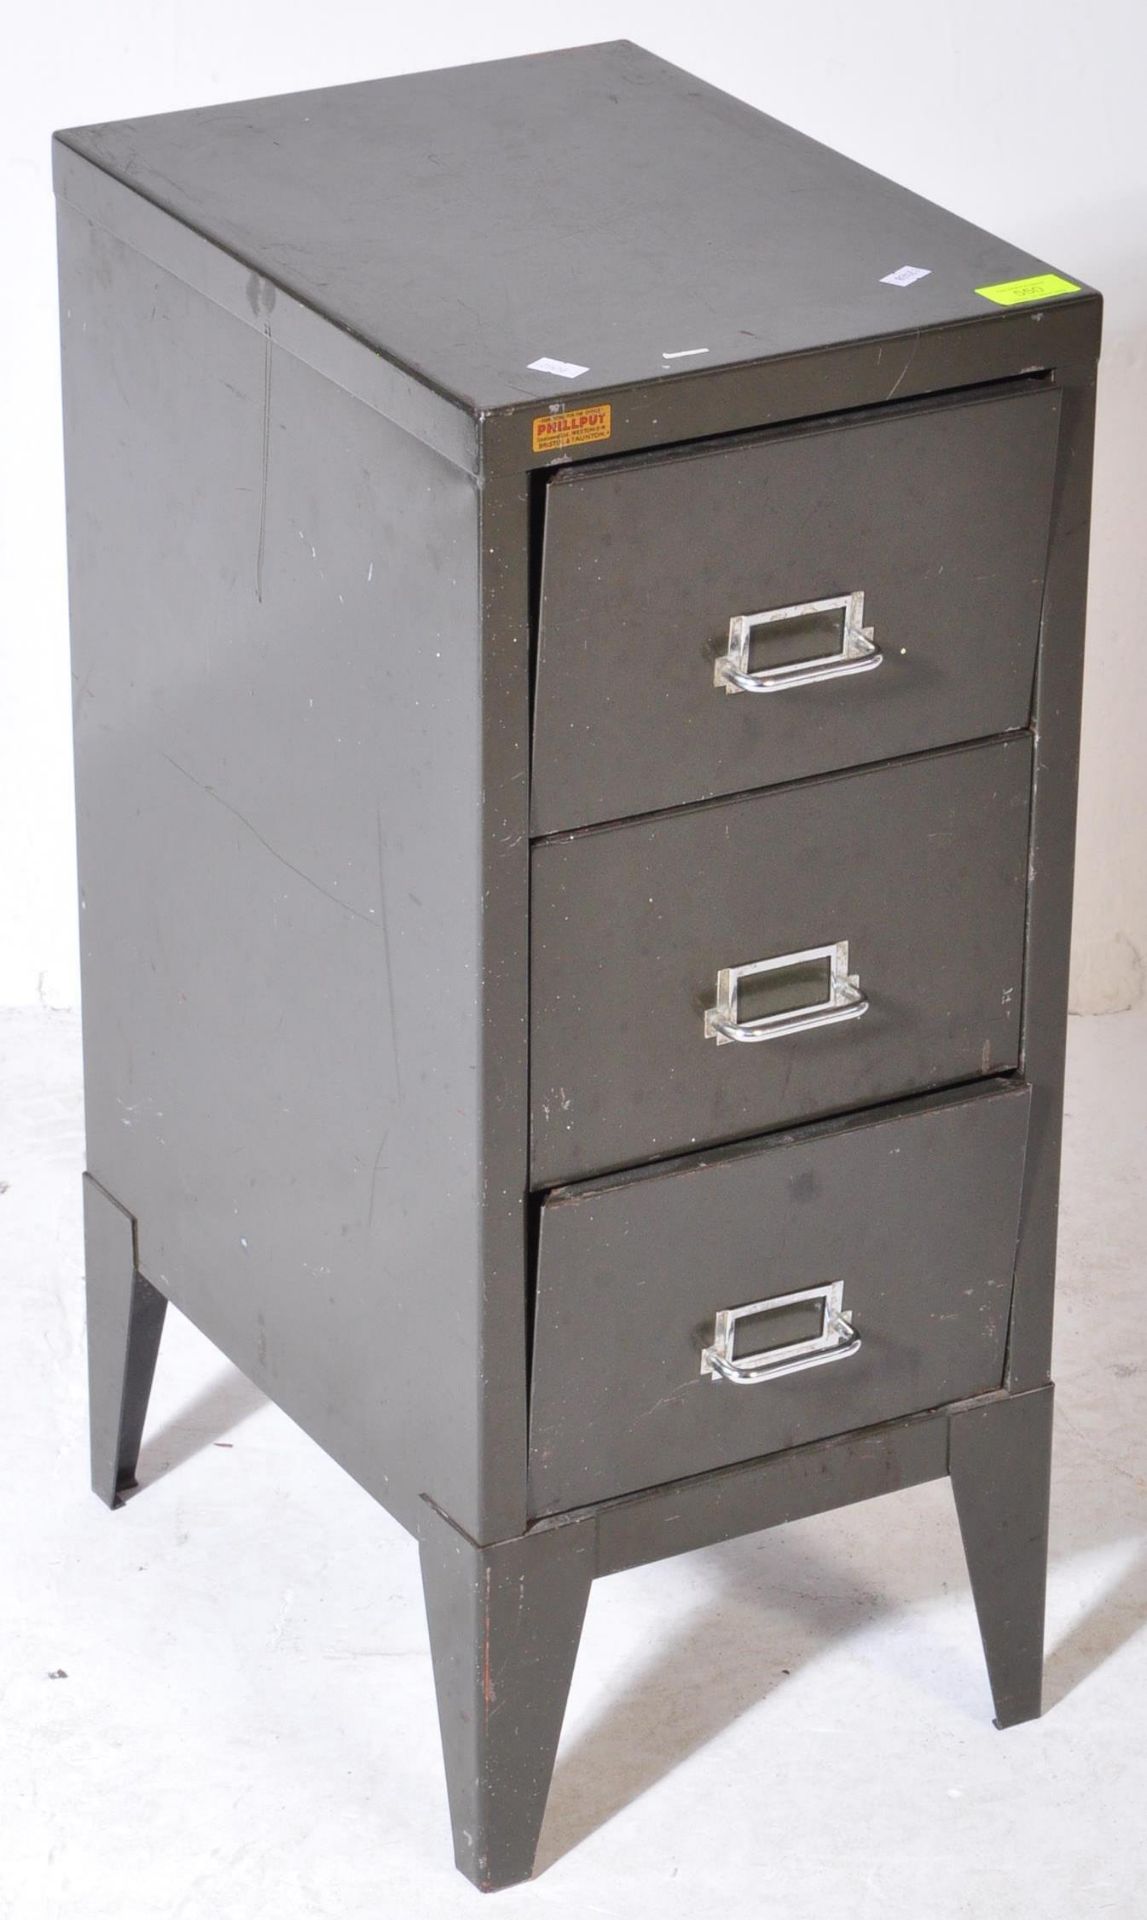 PHILLPUT - MID 20TH CENTURY INDUSTRIAL GREEN FILING CABINET - Image 2 of 6